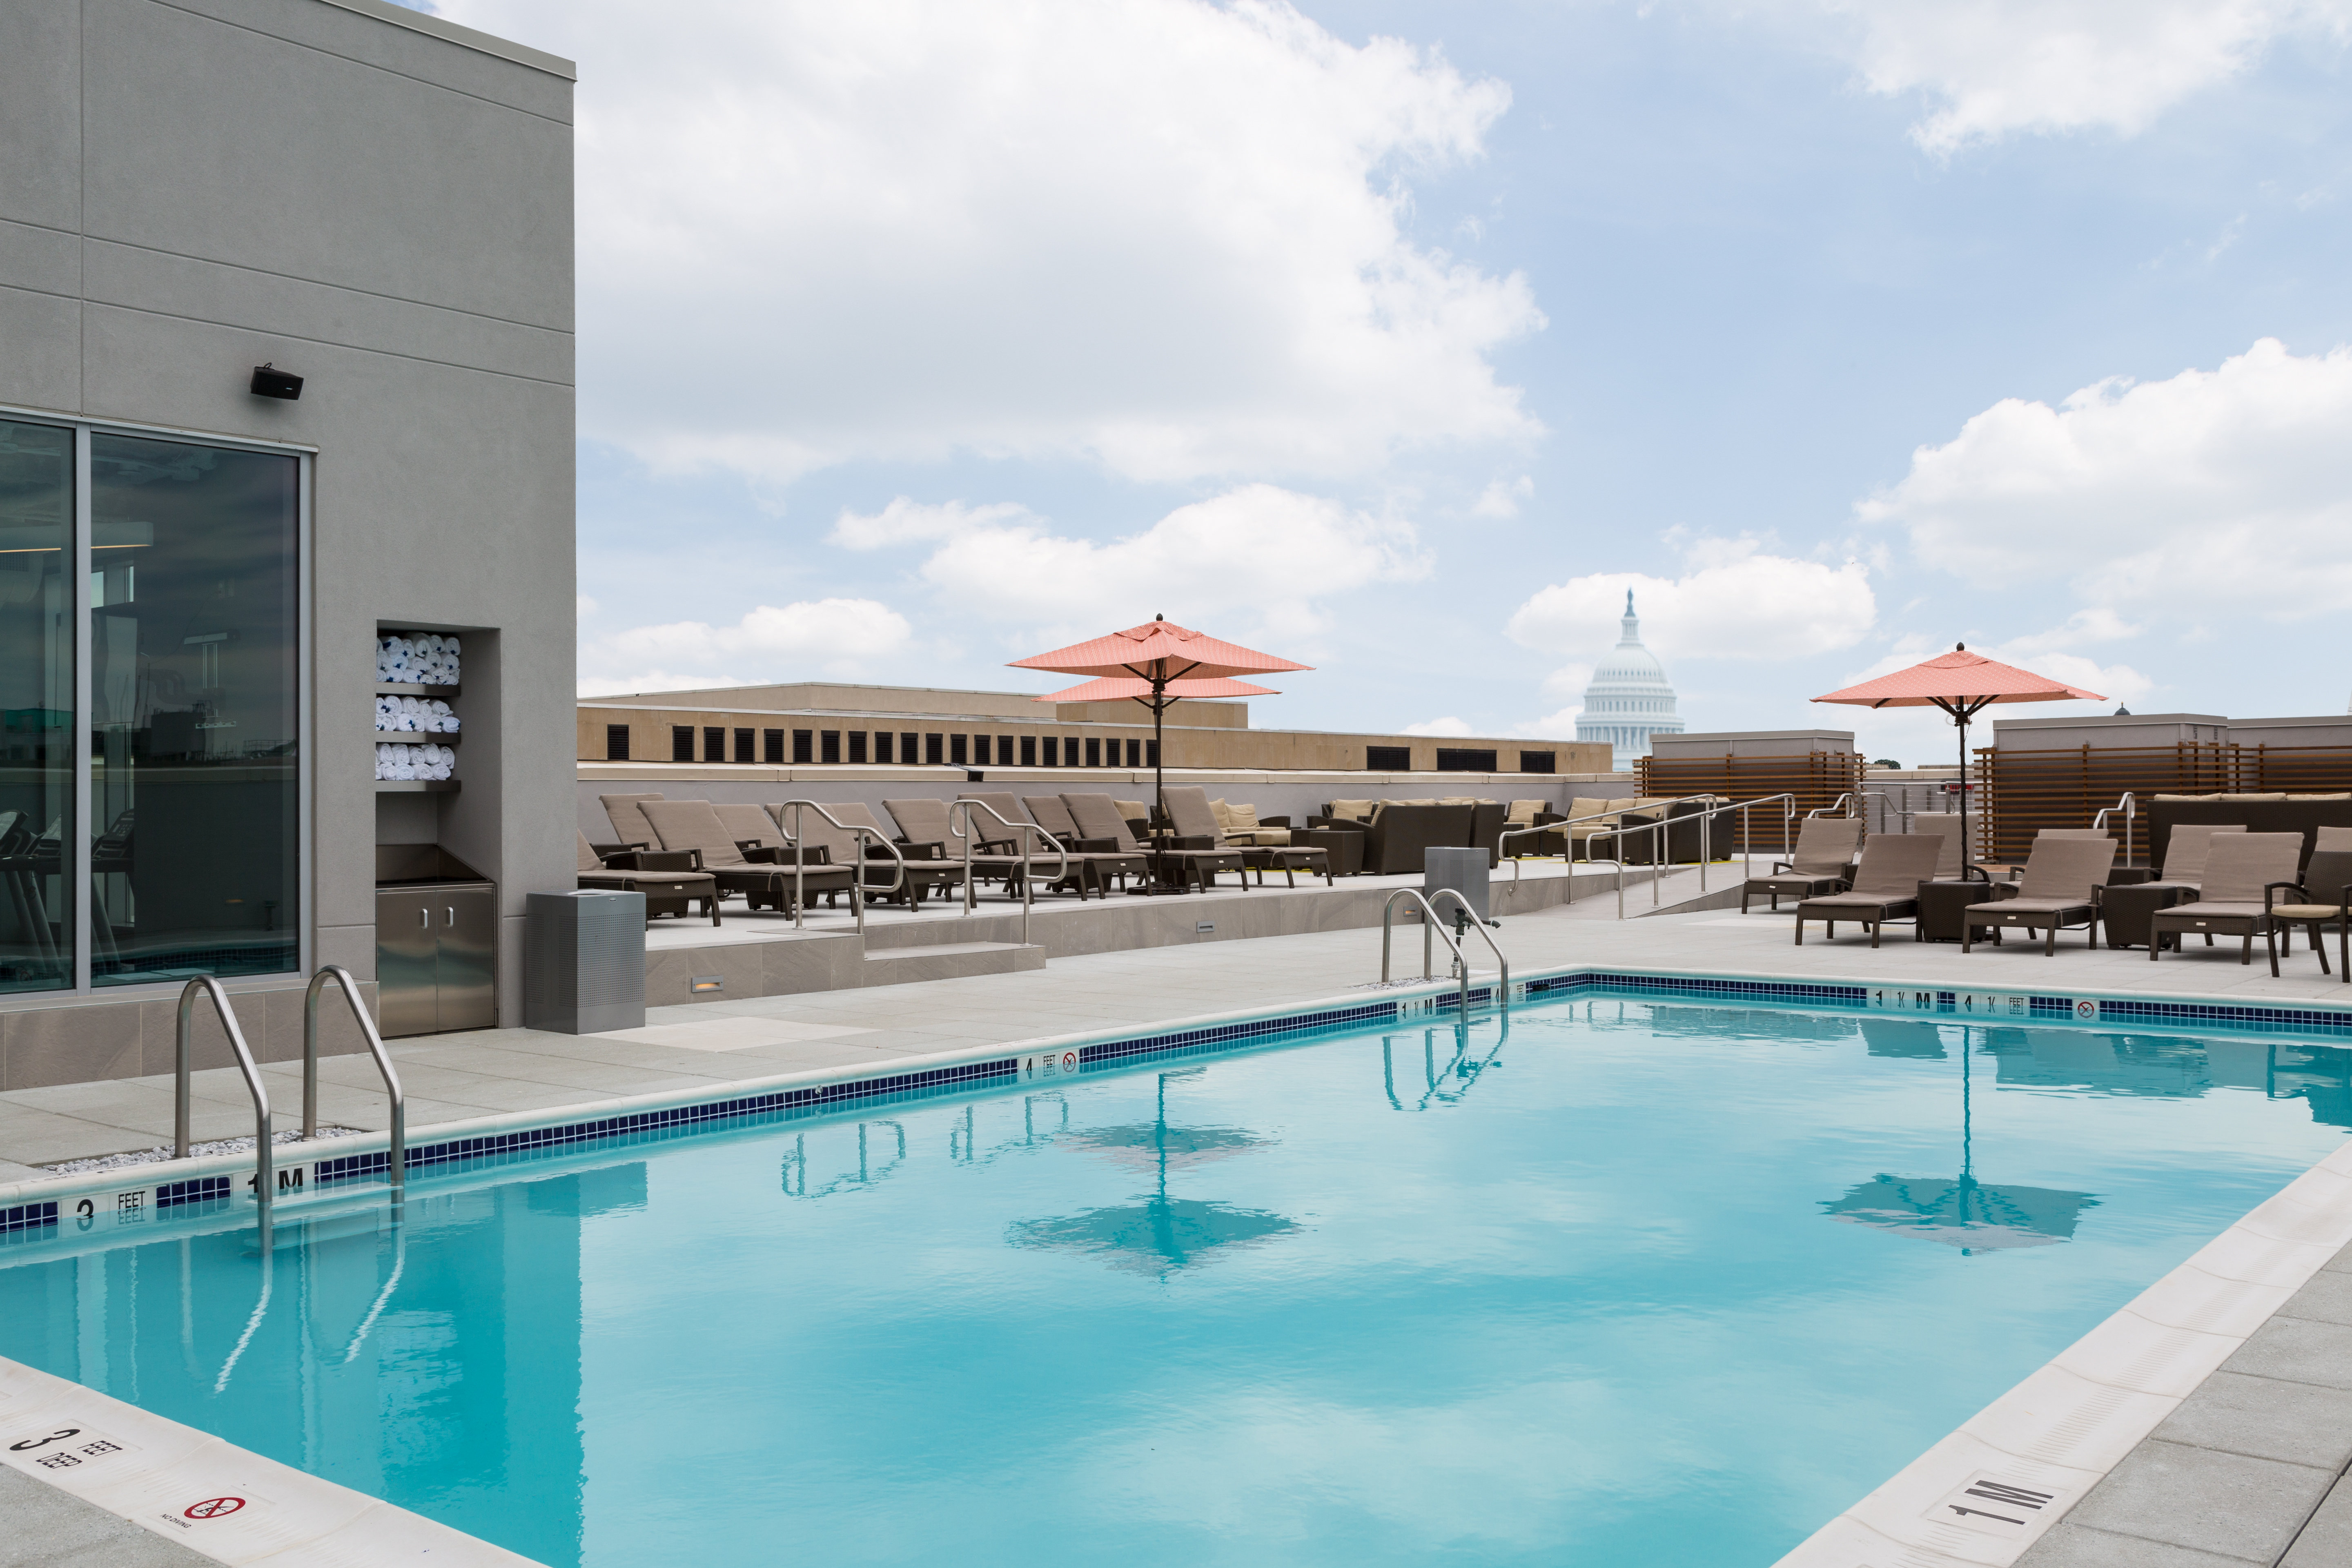 Rooftop pool and bar with a view of the Capitol.